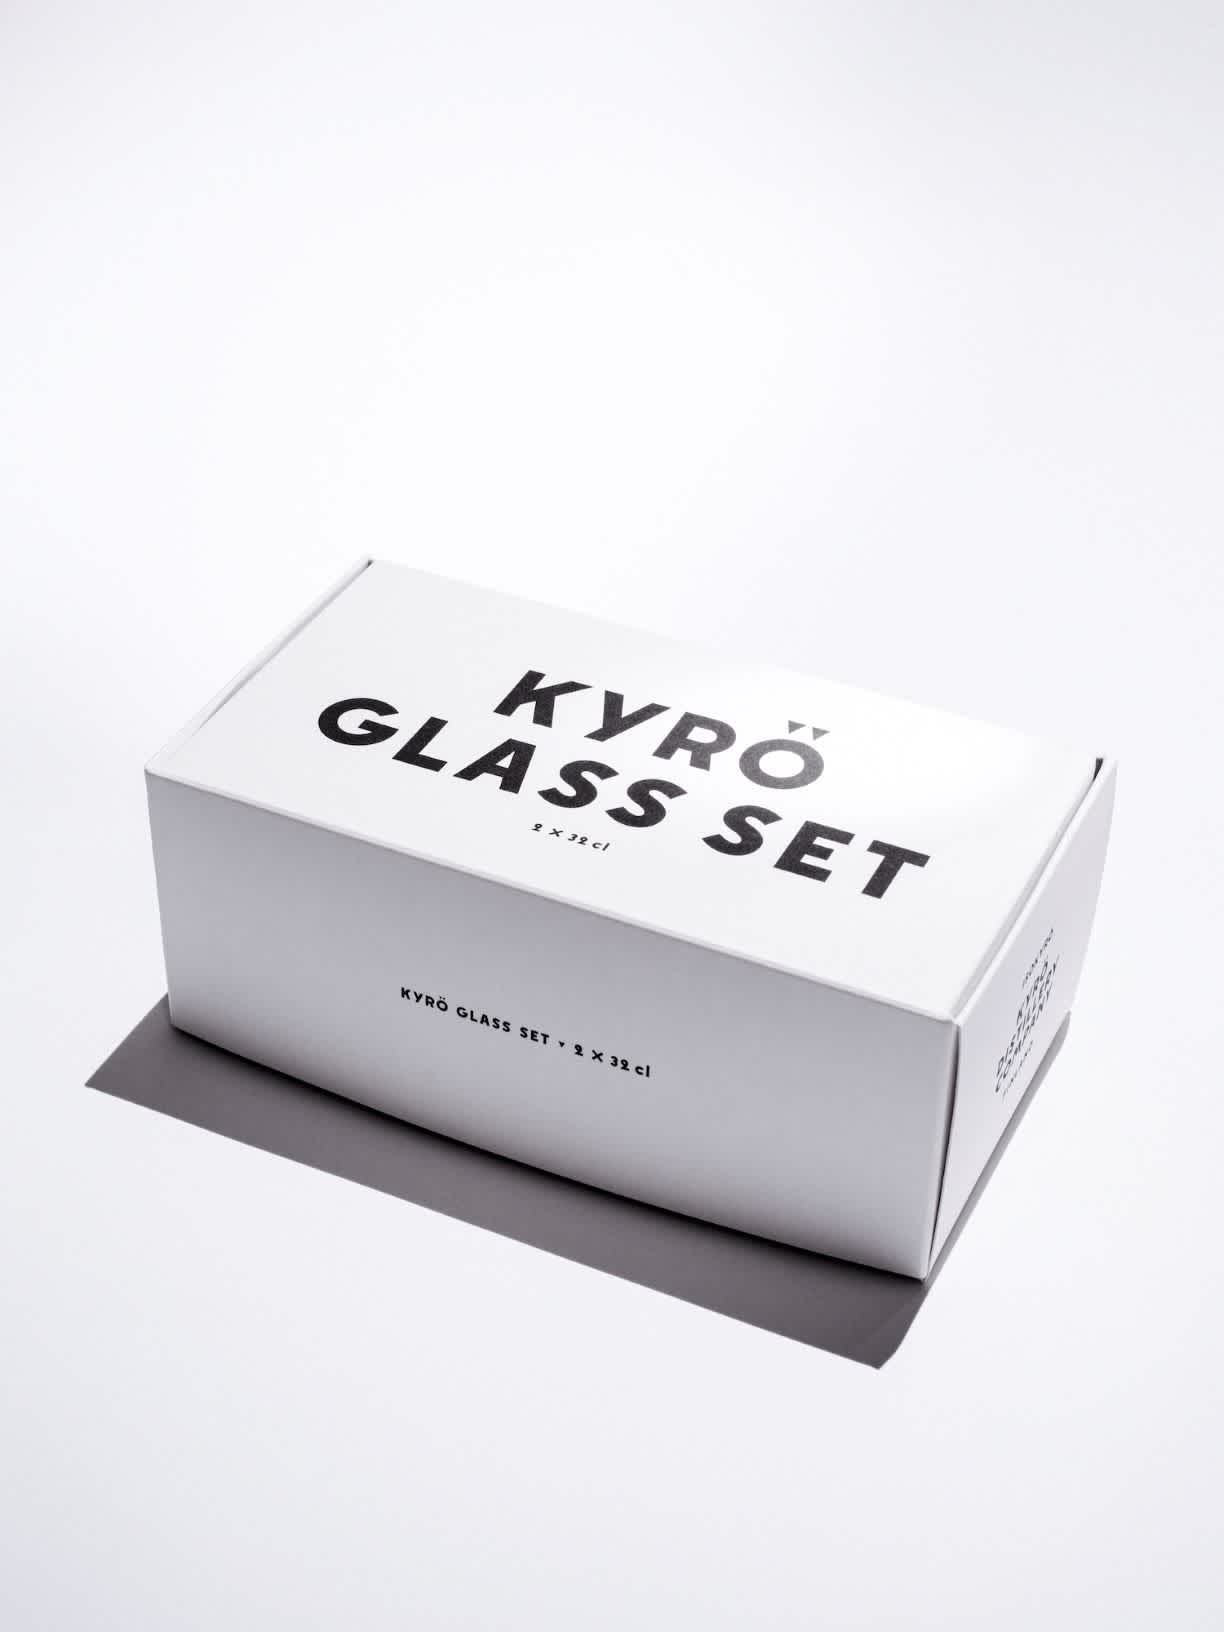 White gift box for two Kyrö drinking glasses.